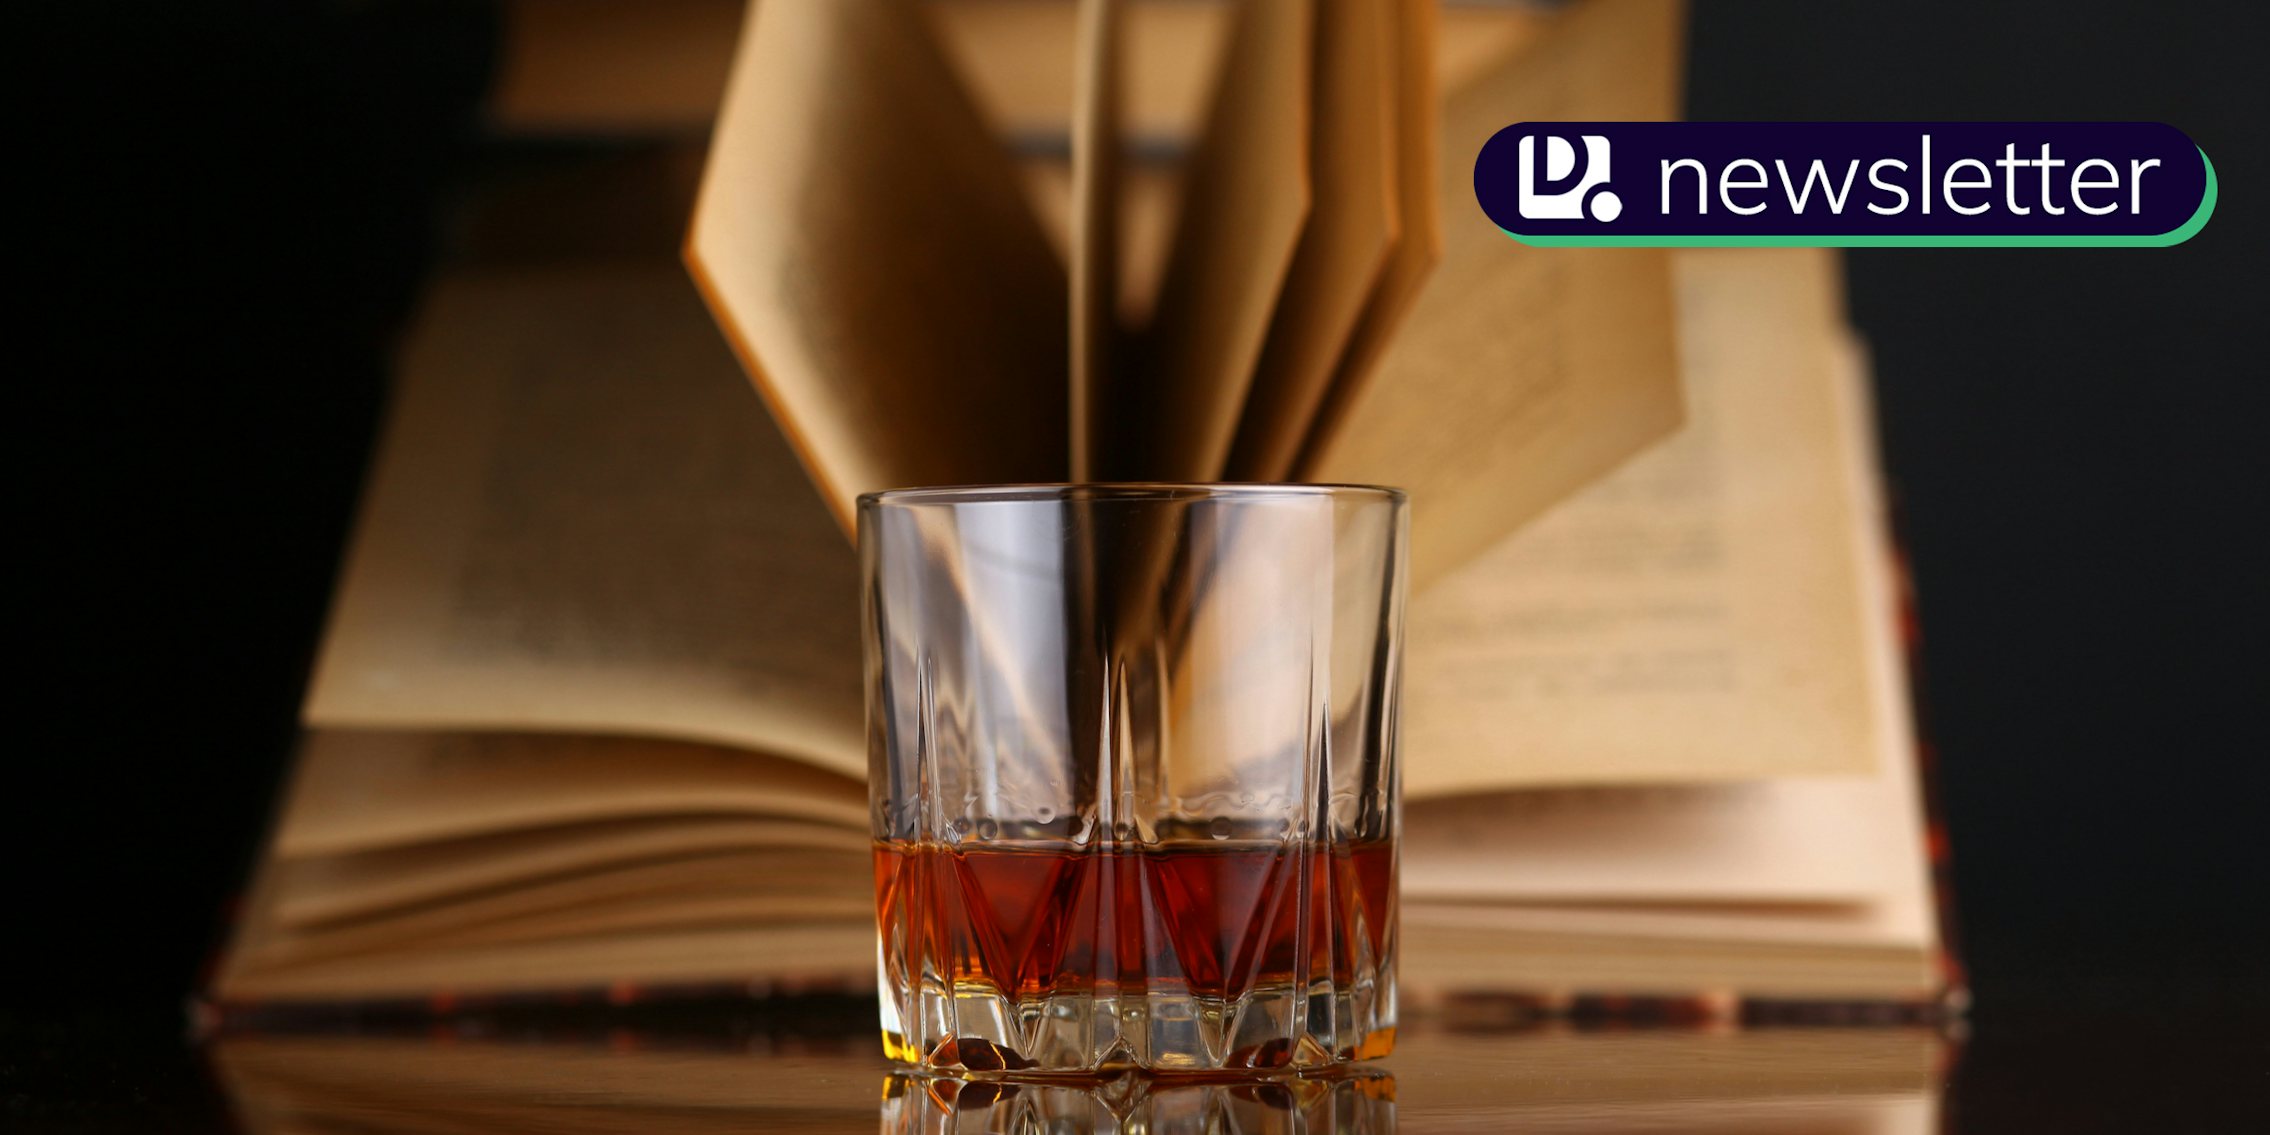 Glass of whiskey on a reflective surface with books. The Daily Dot newsletter logo is in the top right corner.